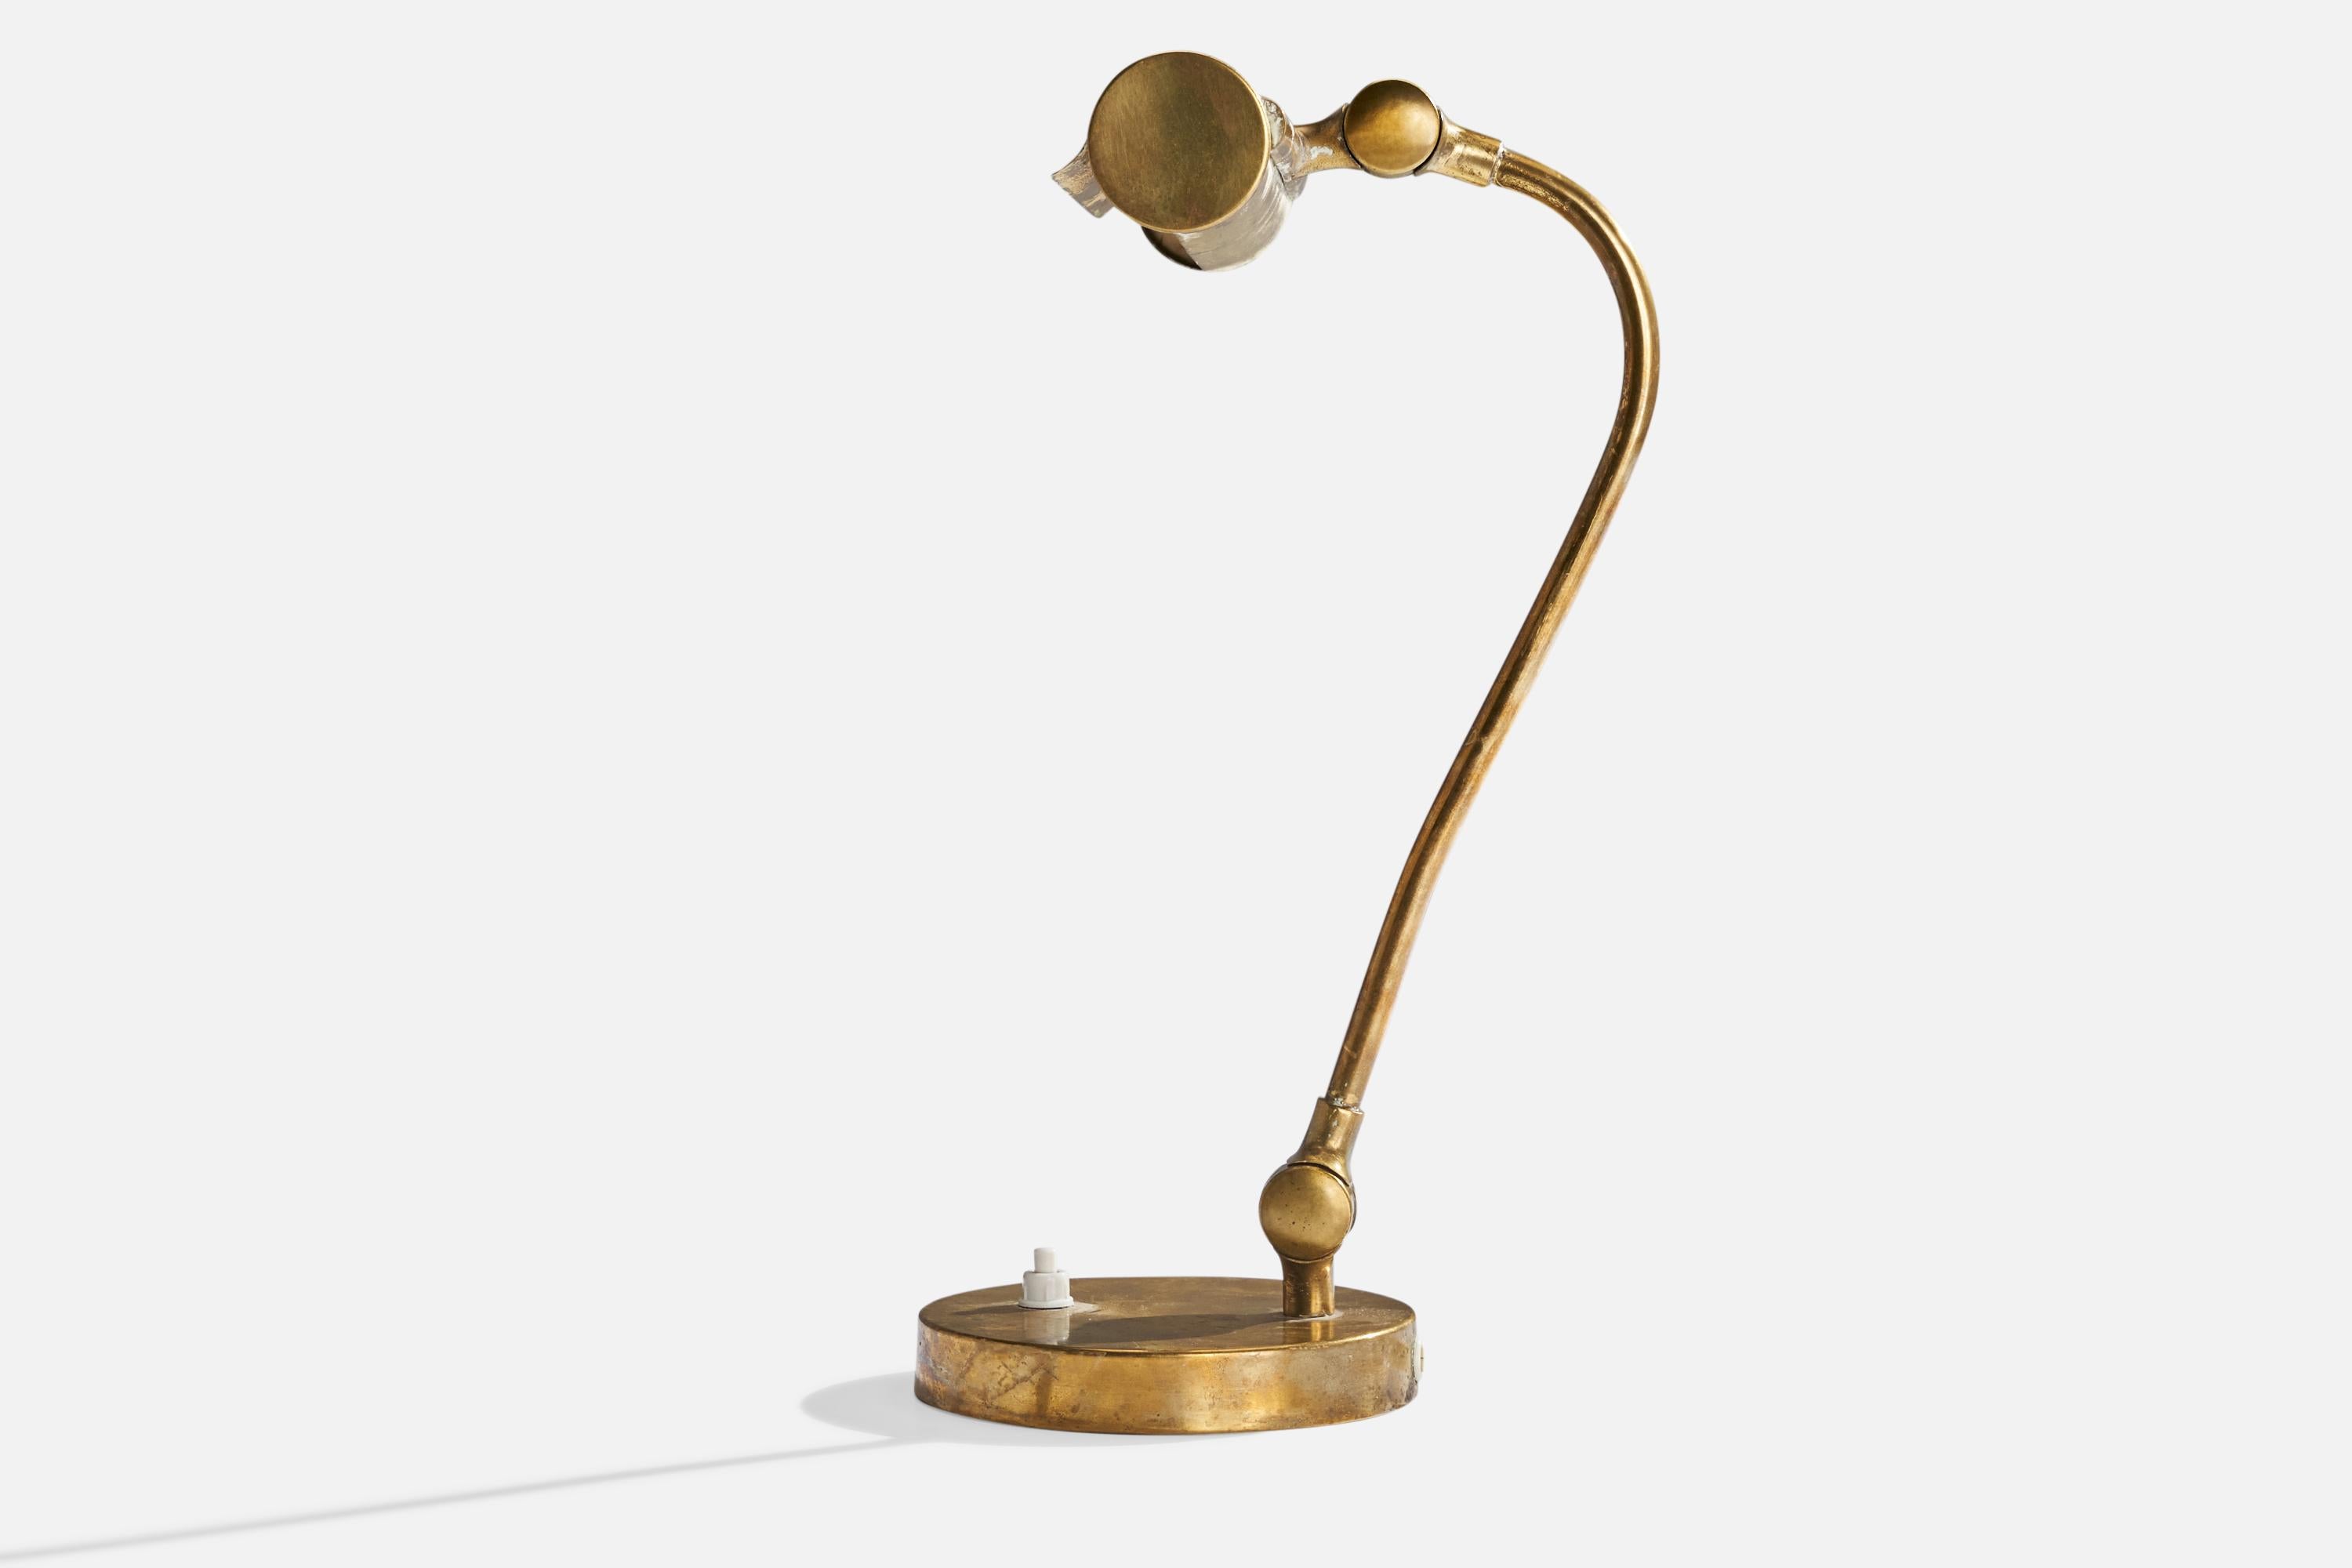 An adjustable brass piano lamp or table lamp designed and produced in Sweden, c. 1940s.

Overall Dimensions (inches): 12” H x 8” W x 9” D
Stated dimensions include shade.
Bulb Specifications: E-14 Bulb
Number of Sockets: 1
All lighting will be